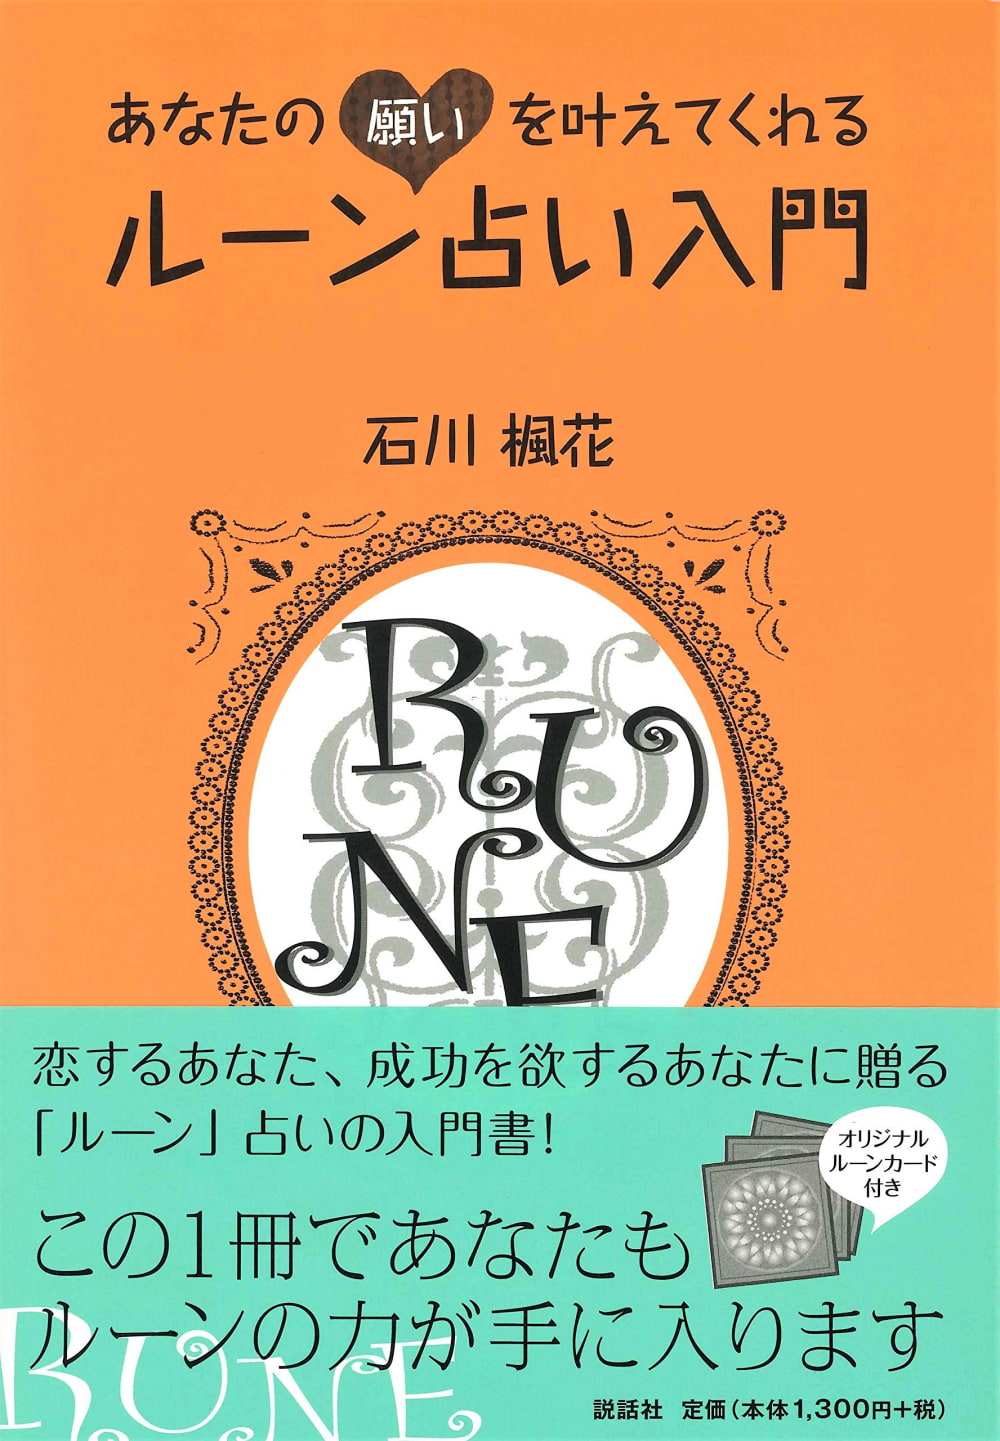 rune　の通販　introduction　your　that　to　grant　fortune-telling　あなたの願いを叶えてくれるルーン占い入門　will　An　wishes